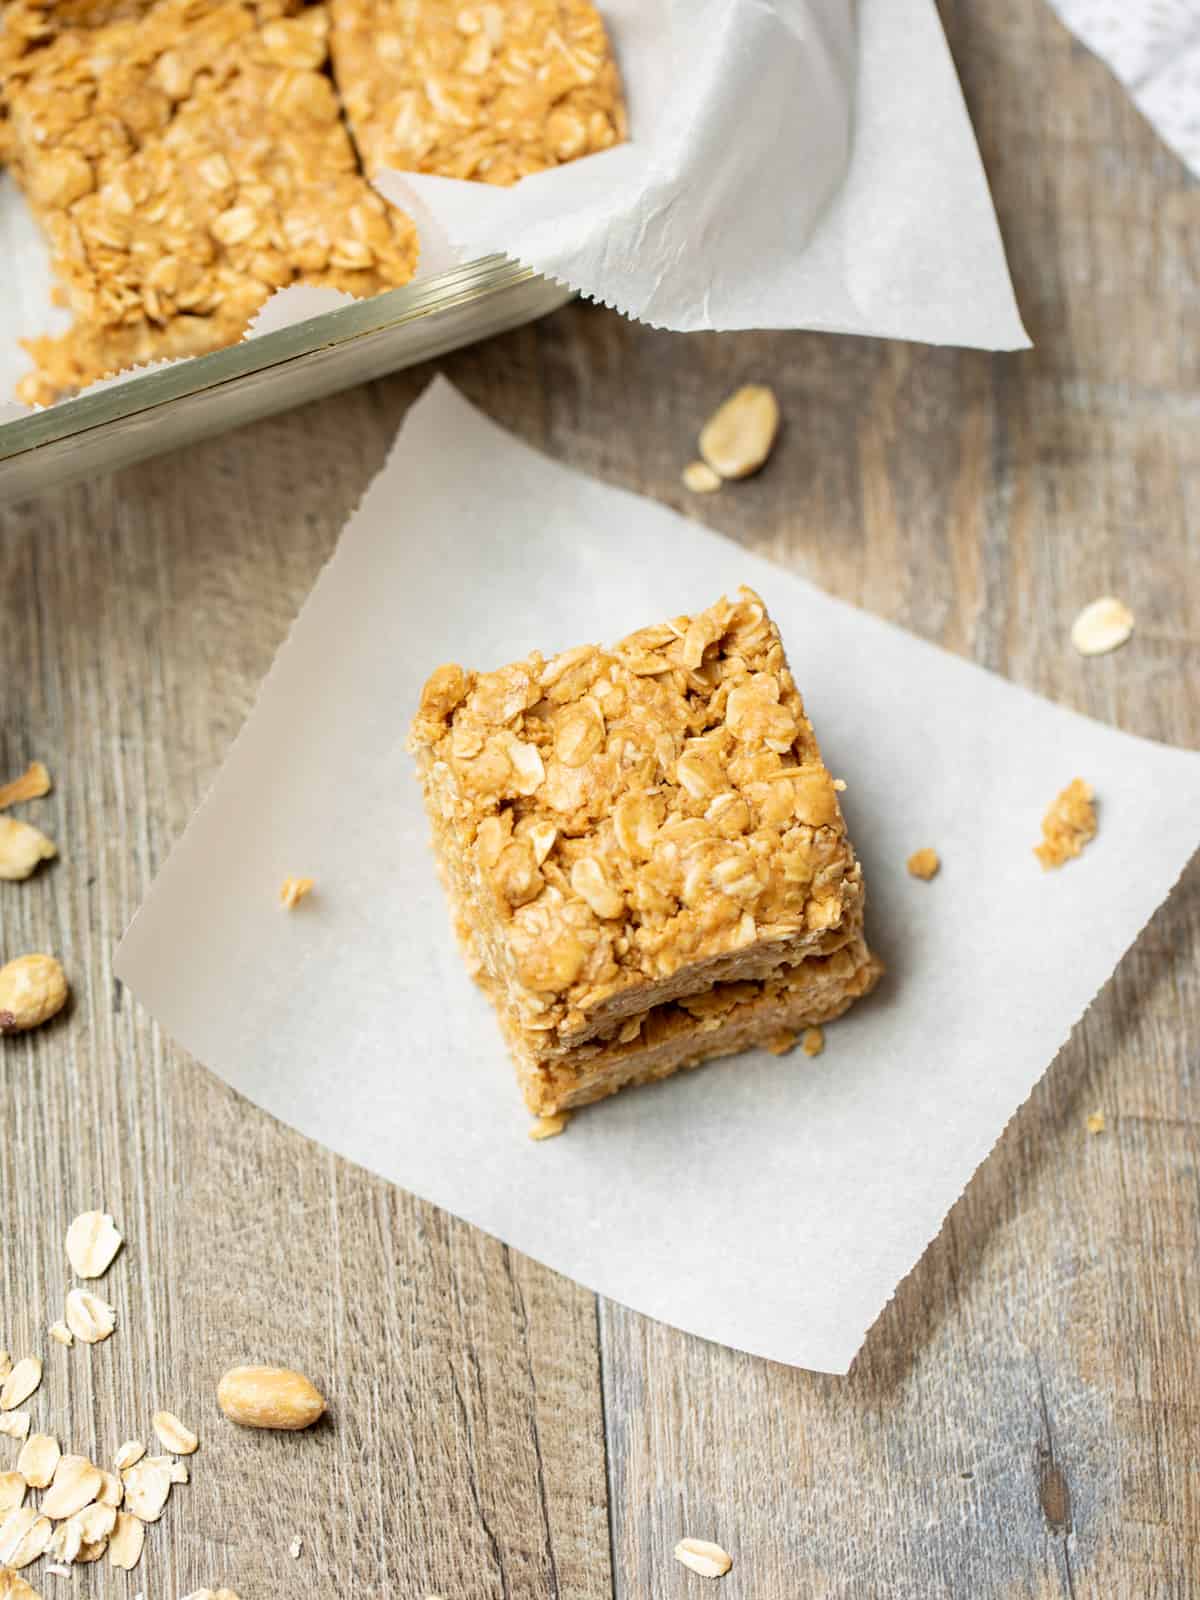 PB Oat Bars stack together on parchment paper next to tray of peanut butter oatmeal bars.